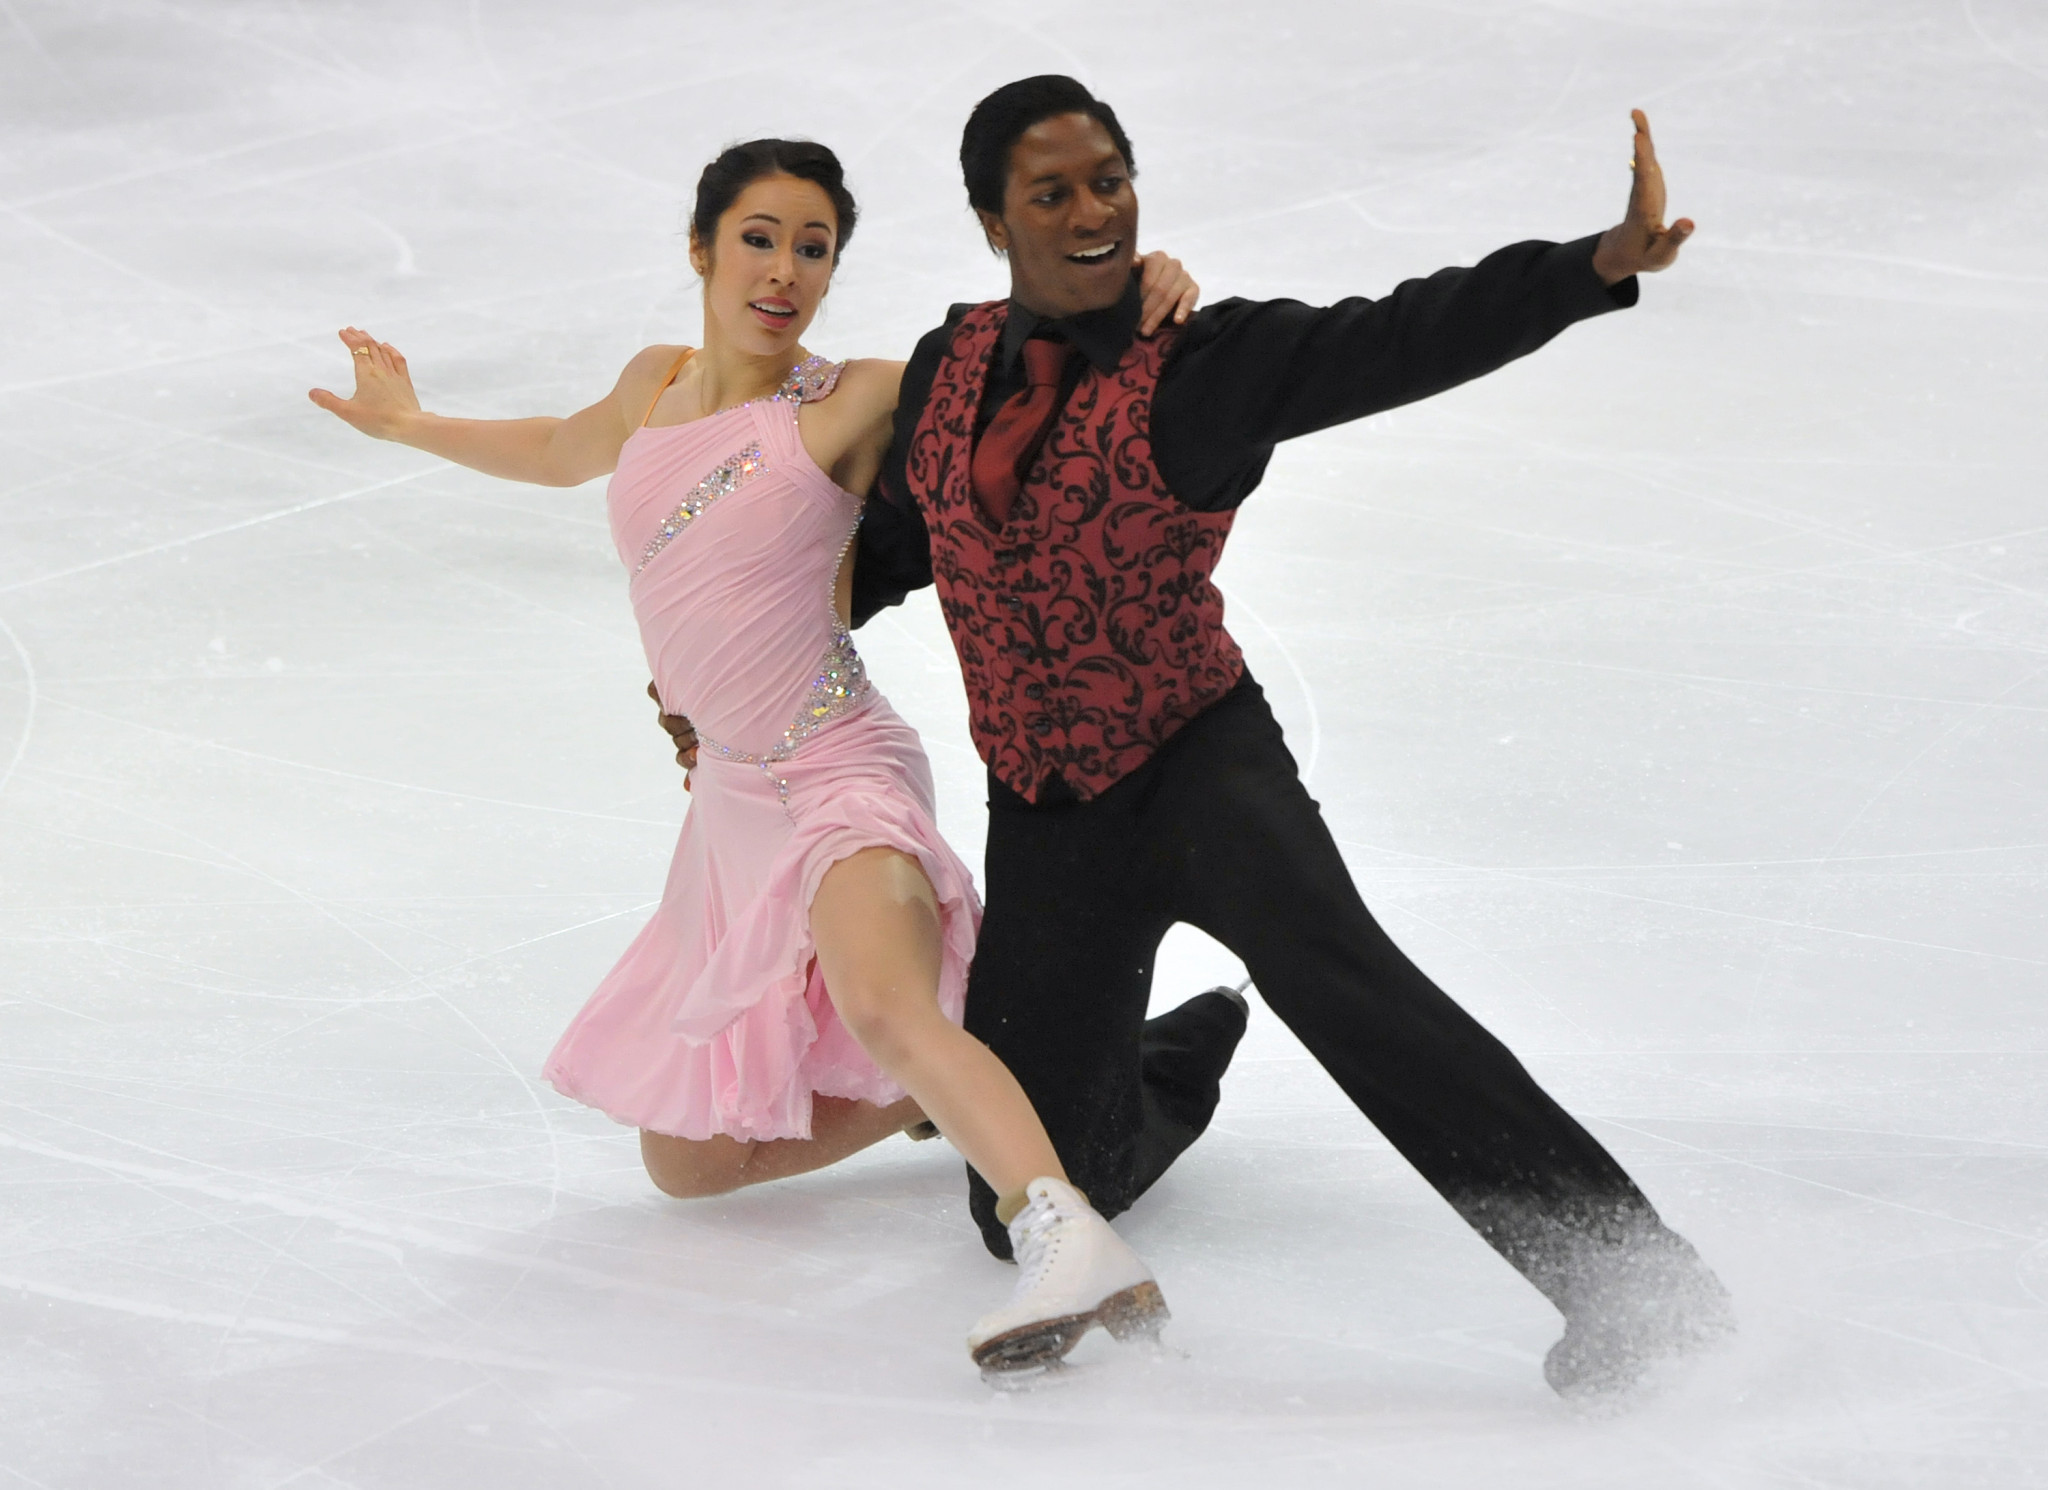 Asher Hill claimed Skate Canada had ignored his past complaints of racism, misogyny, homophobia and abuse ©Getty Images